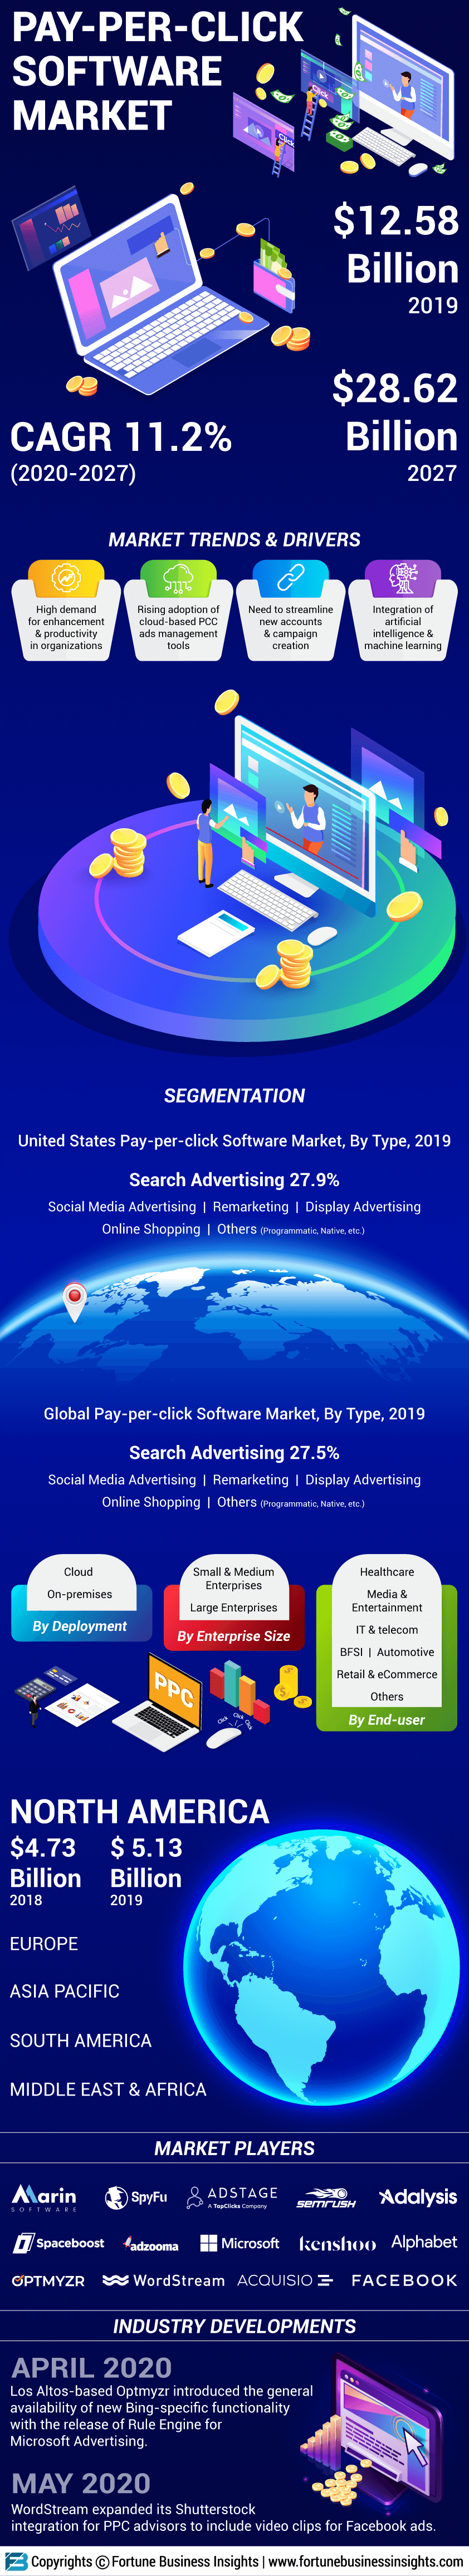 Pay-per-click Software Market Size, Share | Industry Report, 2027